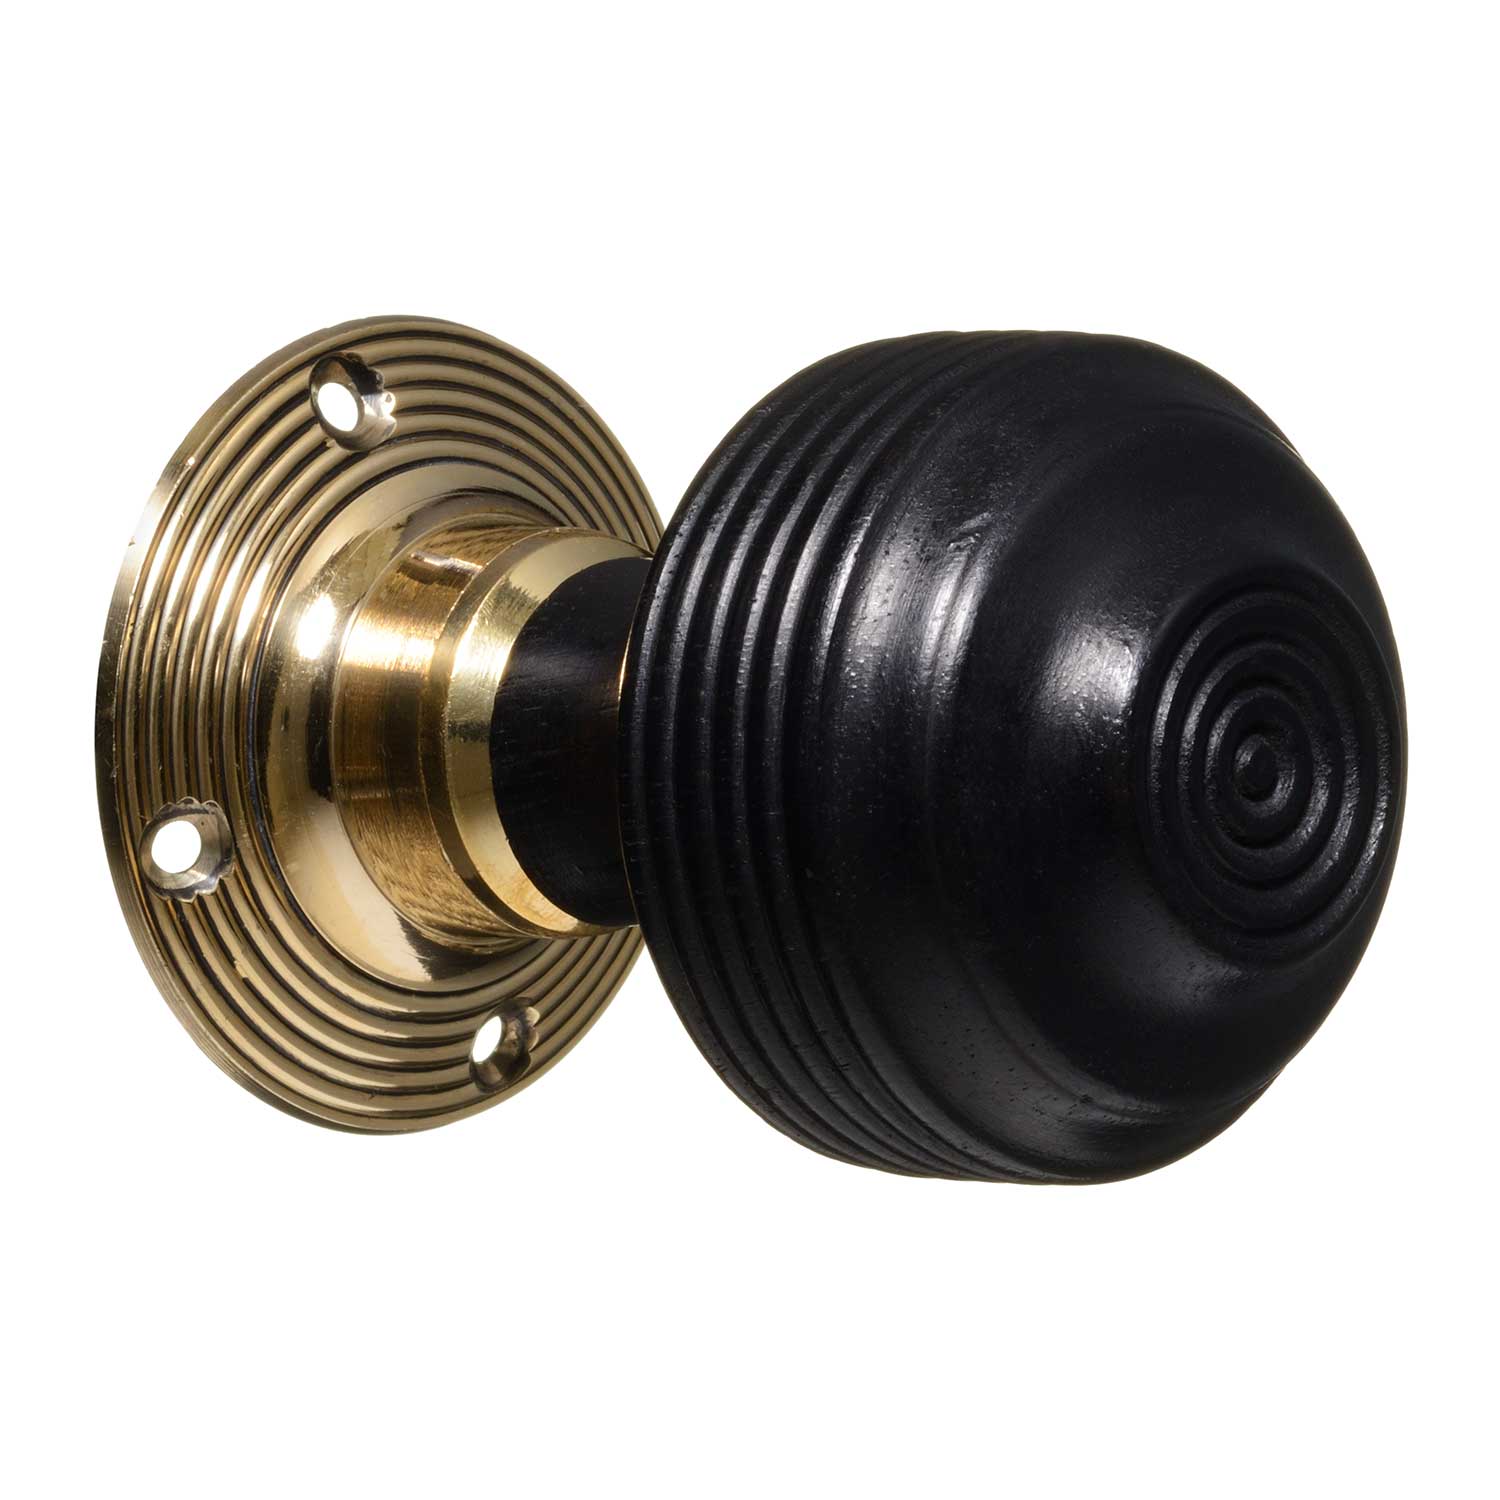 Small Brass Cottage Rim or Mortise Door Knobs